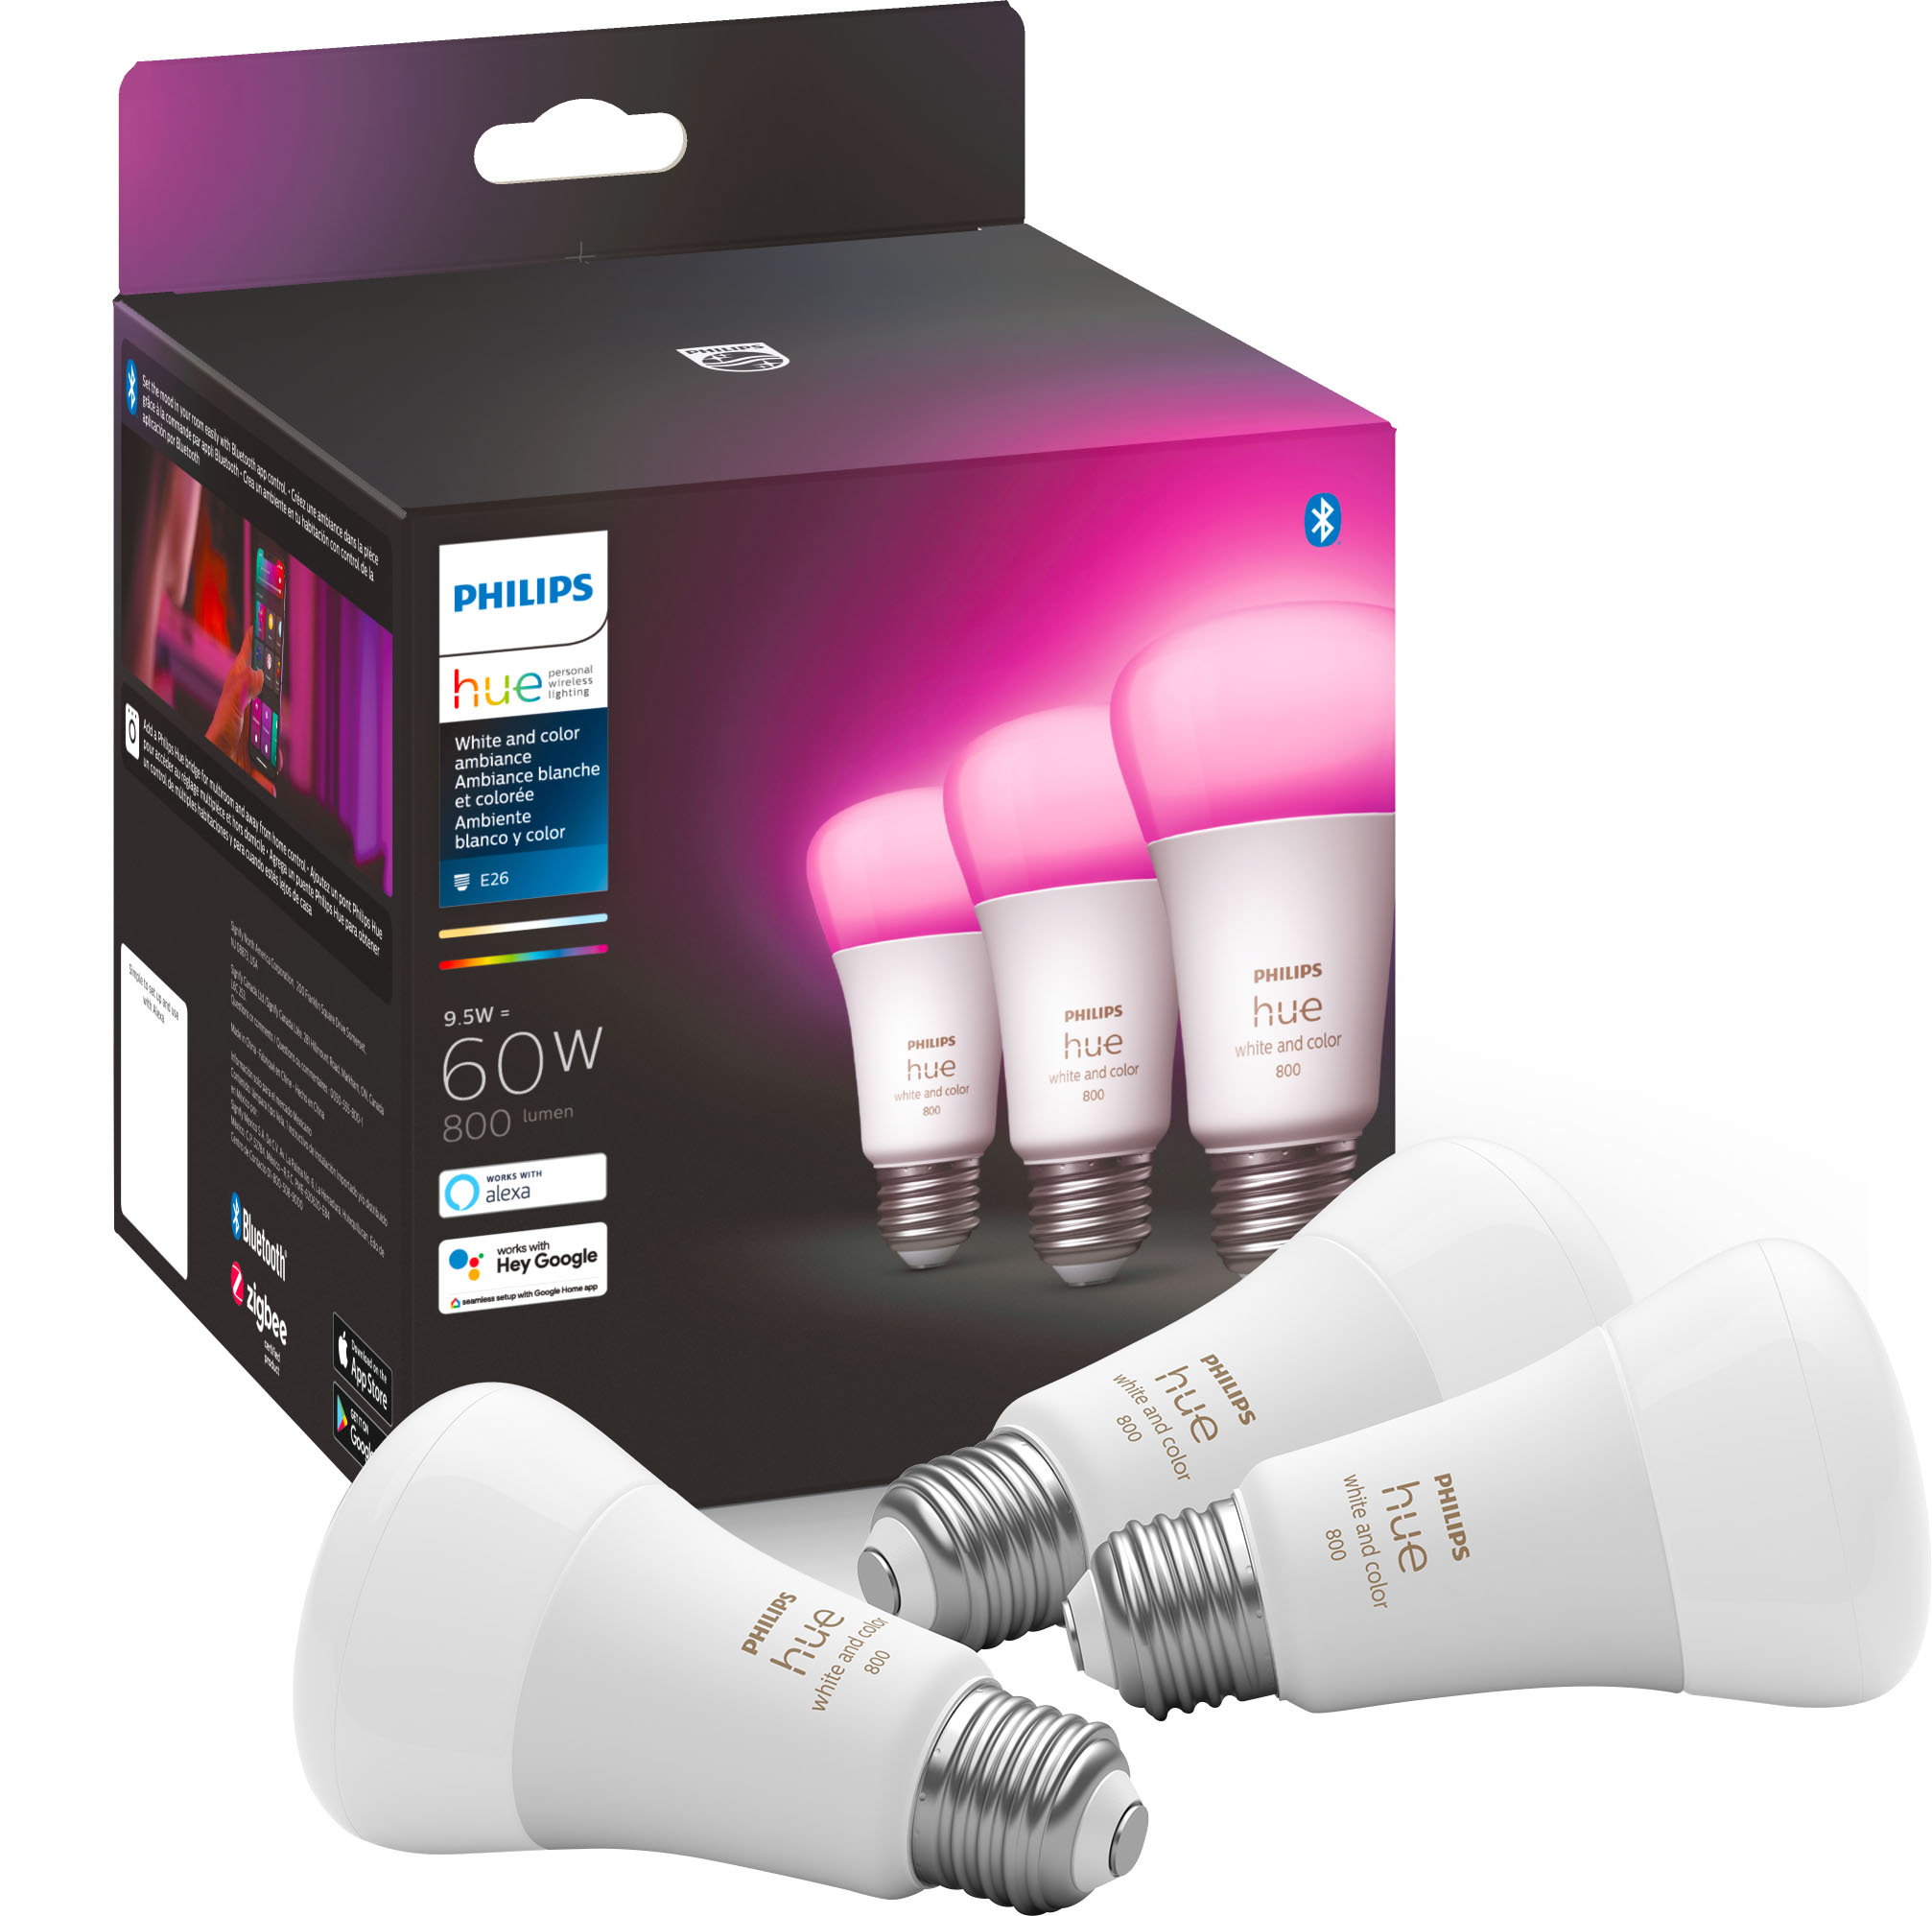 Philips Hue A19 Bluetooth 60W LED Smart Bulbs (3-Pack) White and Color Ambiance 562785 - Best